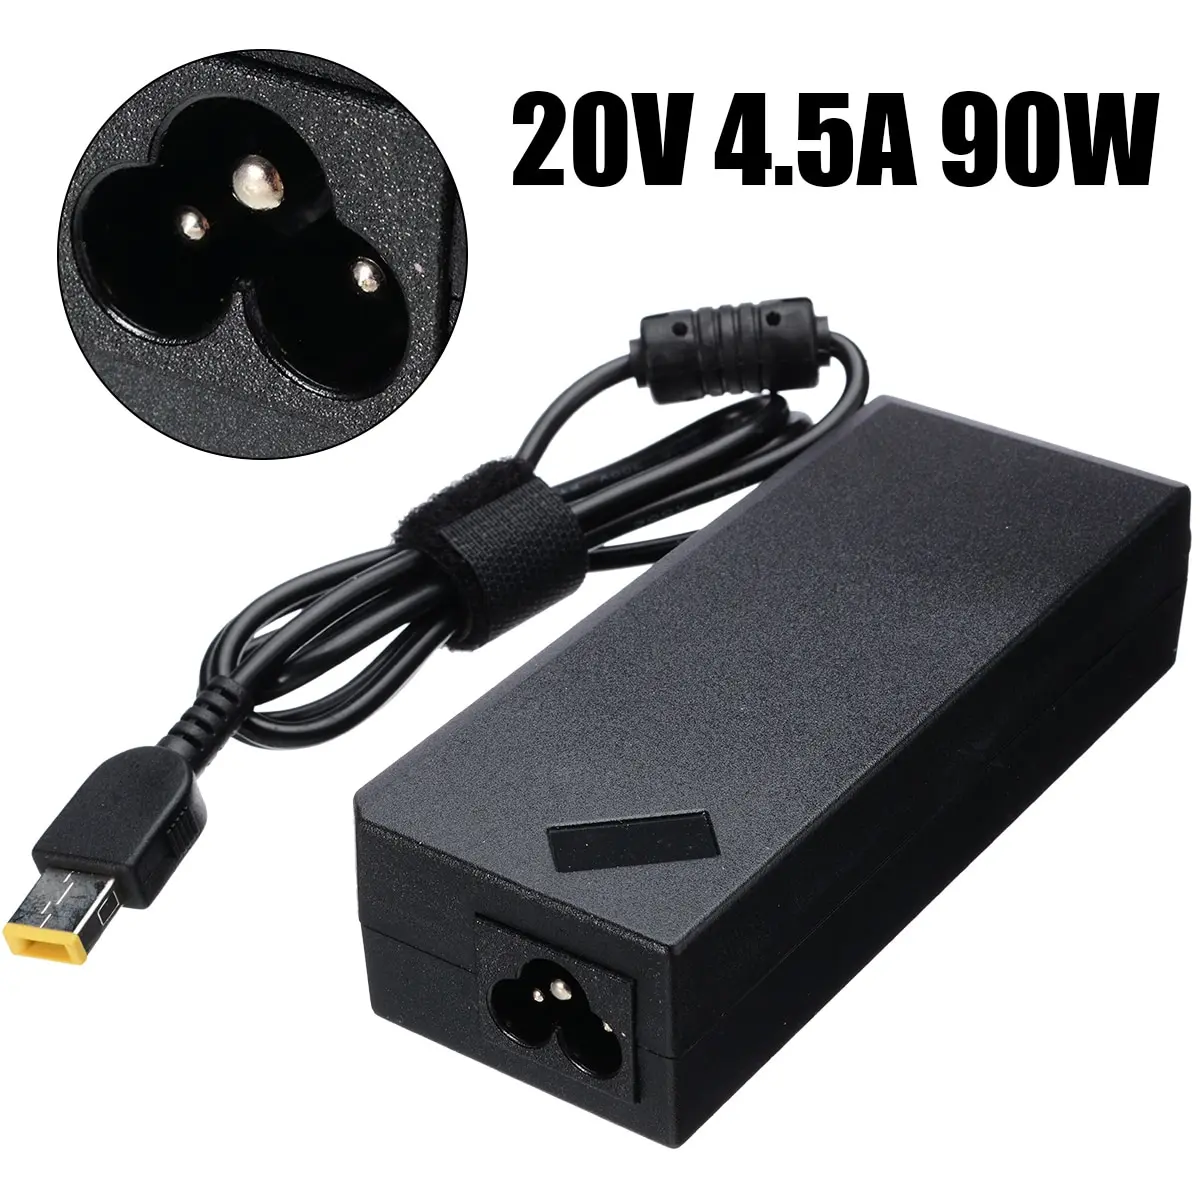 

POHIKS 1pc High Quality 90W Laptop Adapter Charger 20V 4.5A Power Supply Charger For L-enovo ThinkPad Laptops